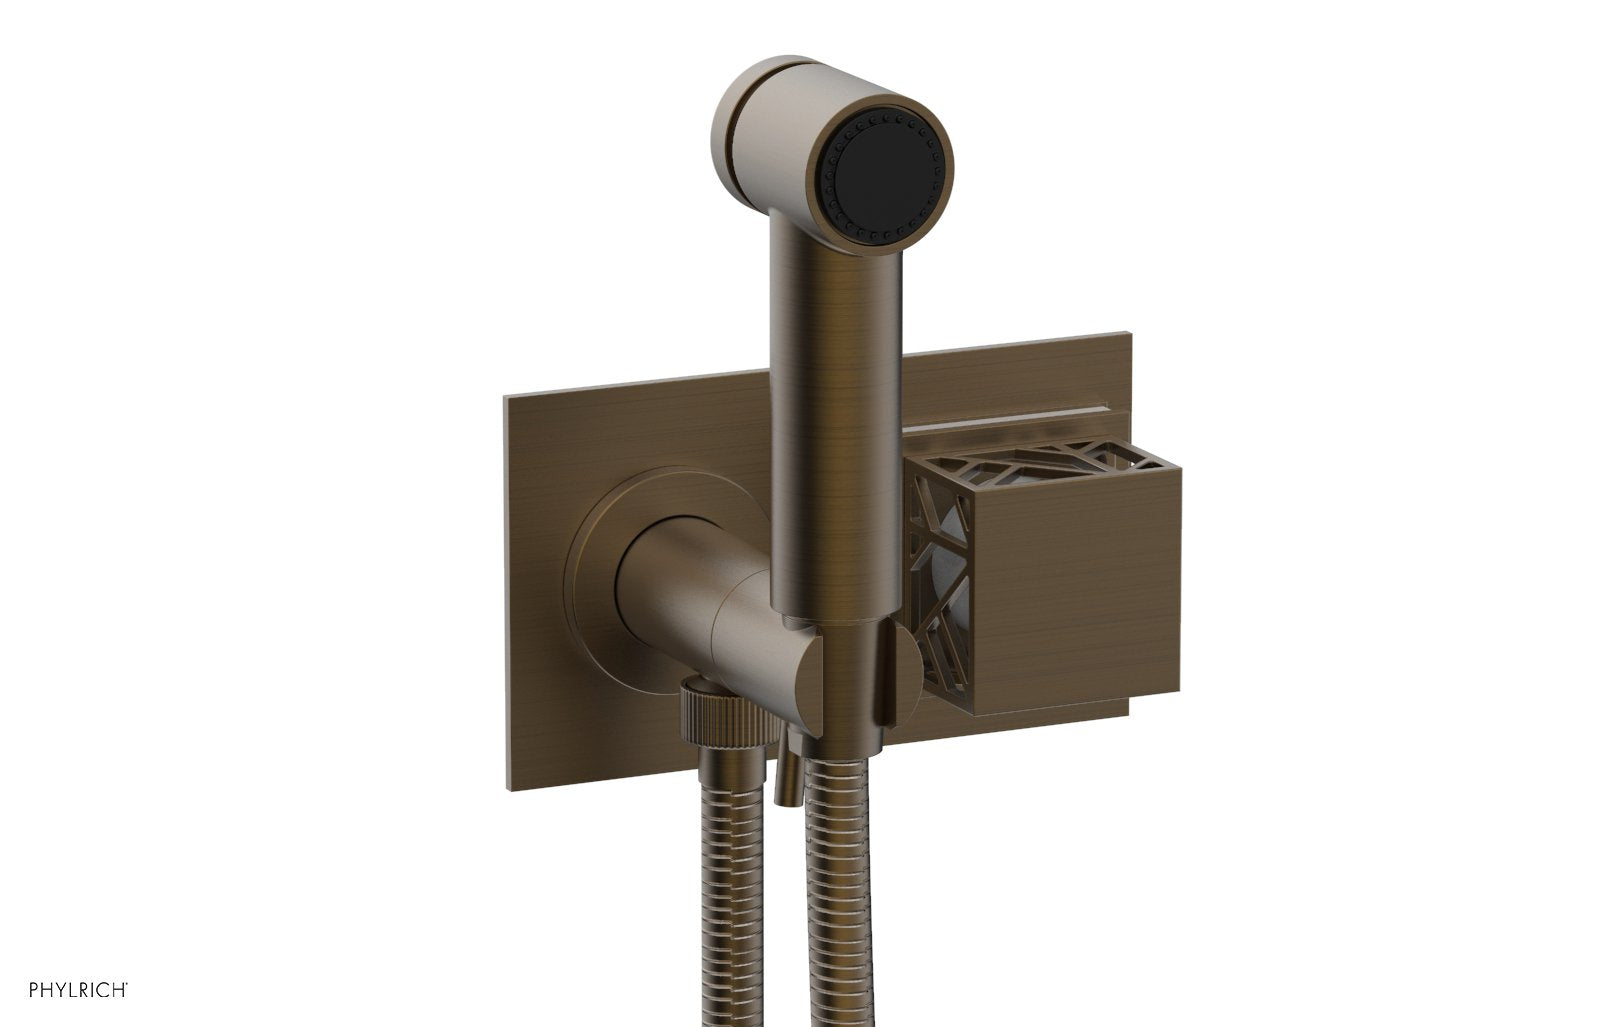 Phylrich JOLIE Wall Mounted Bidet, Square Handle with "White" Accents